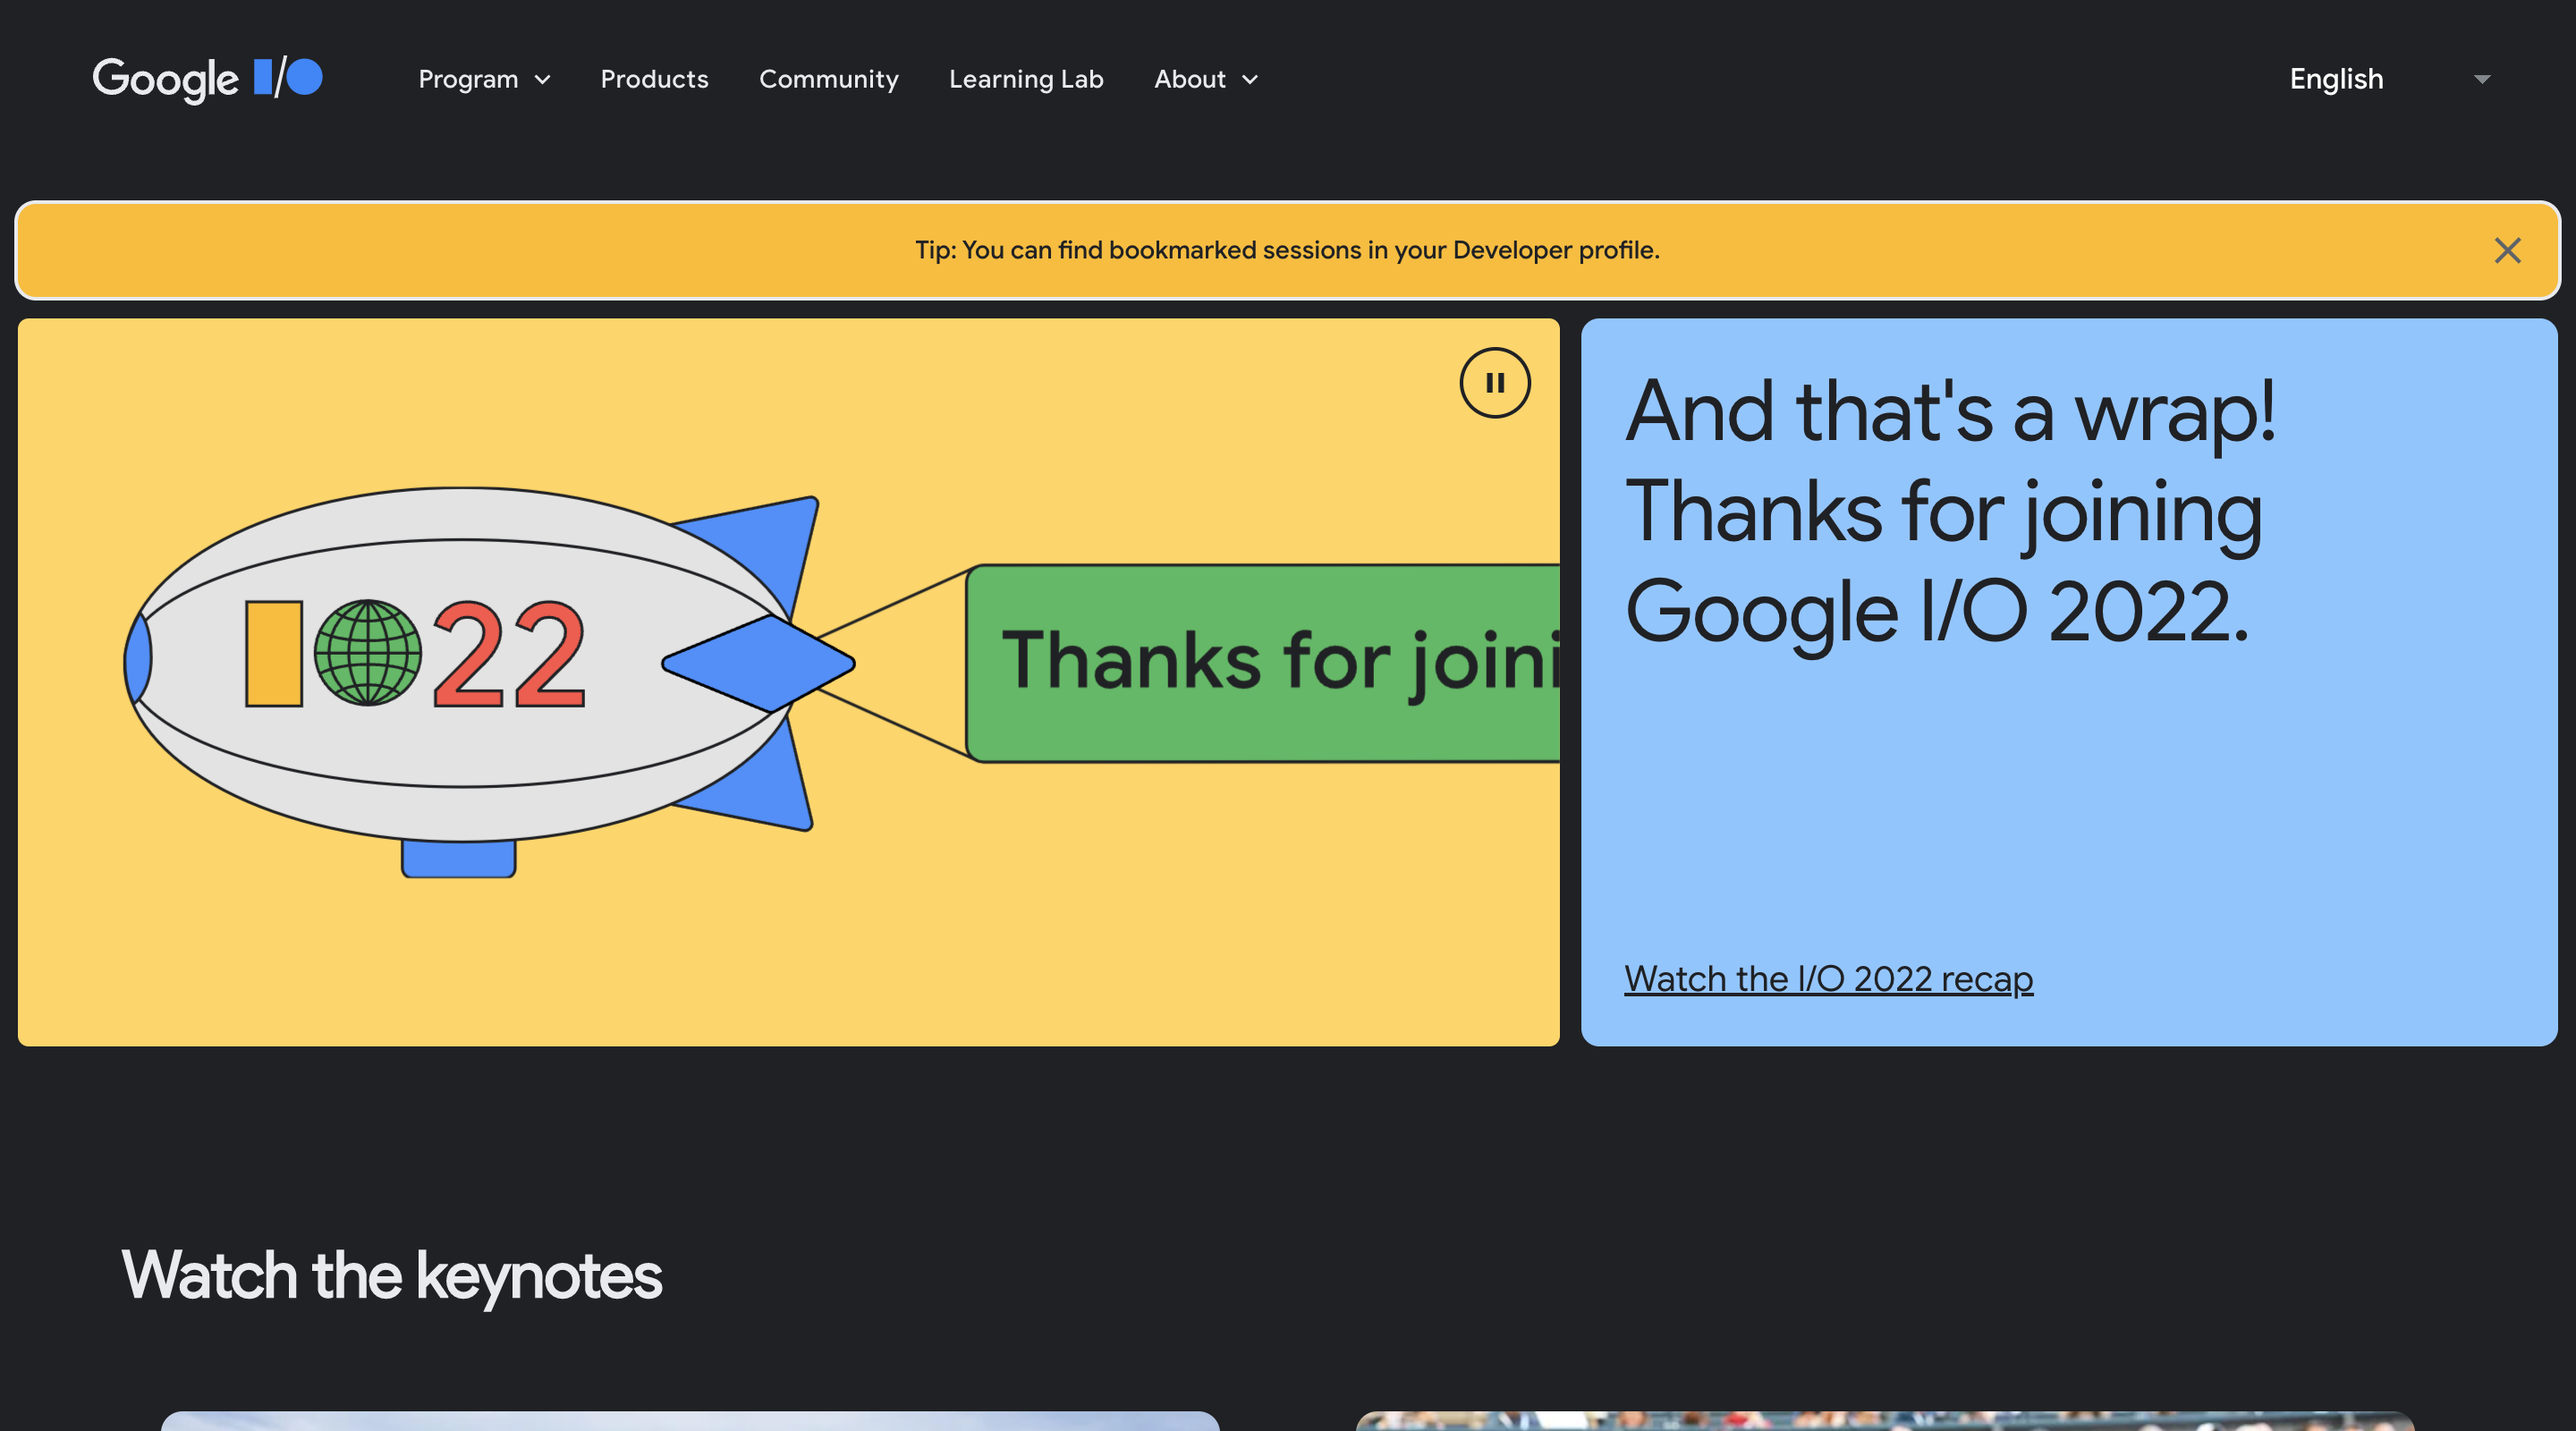 Screenshot of the Google I/O 2022 home page. The header contains the Google I/O logo, the main navigation, and a language selector. The hero section contains an illustration of a blimp with 'IO22' written on the side. The blimp is towing a banner that says 'Thanks for joining'.